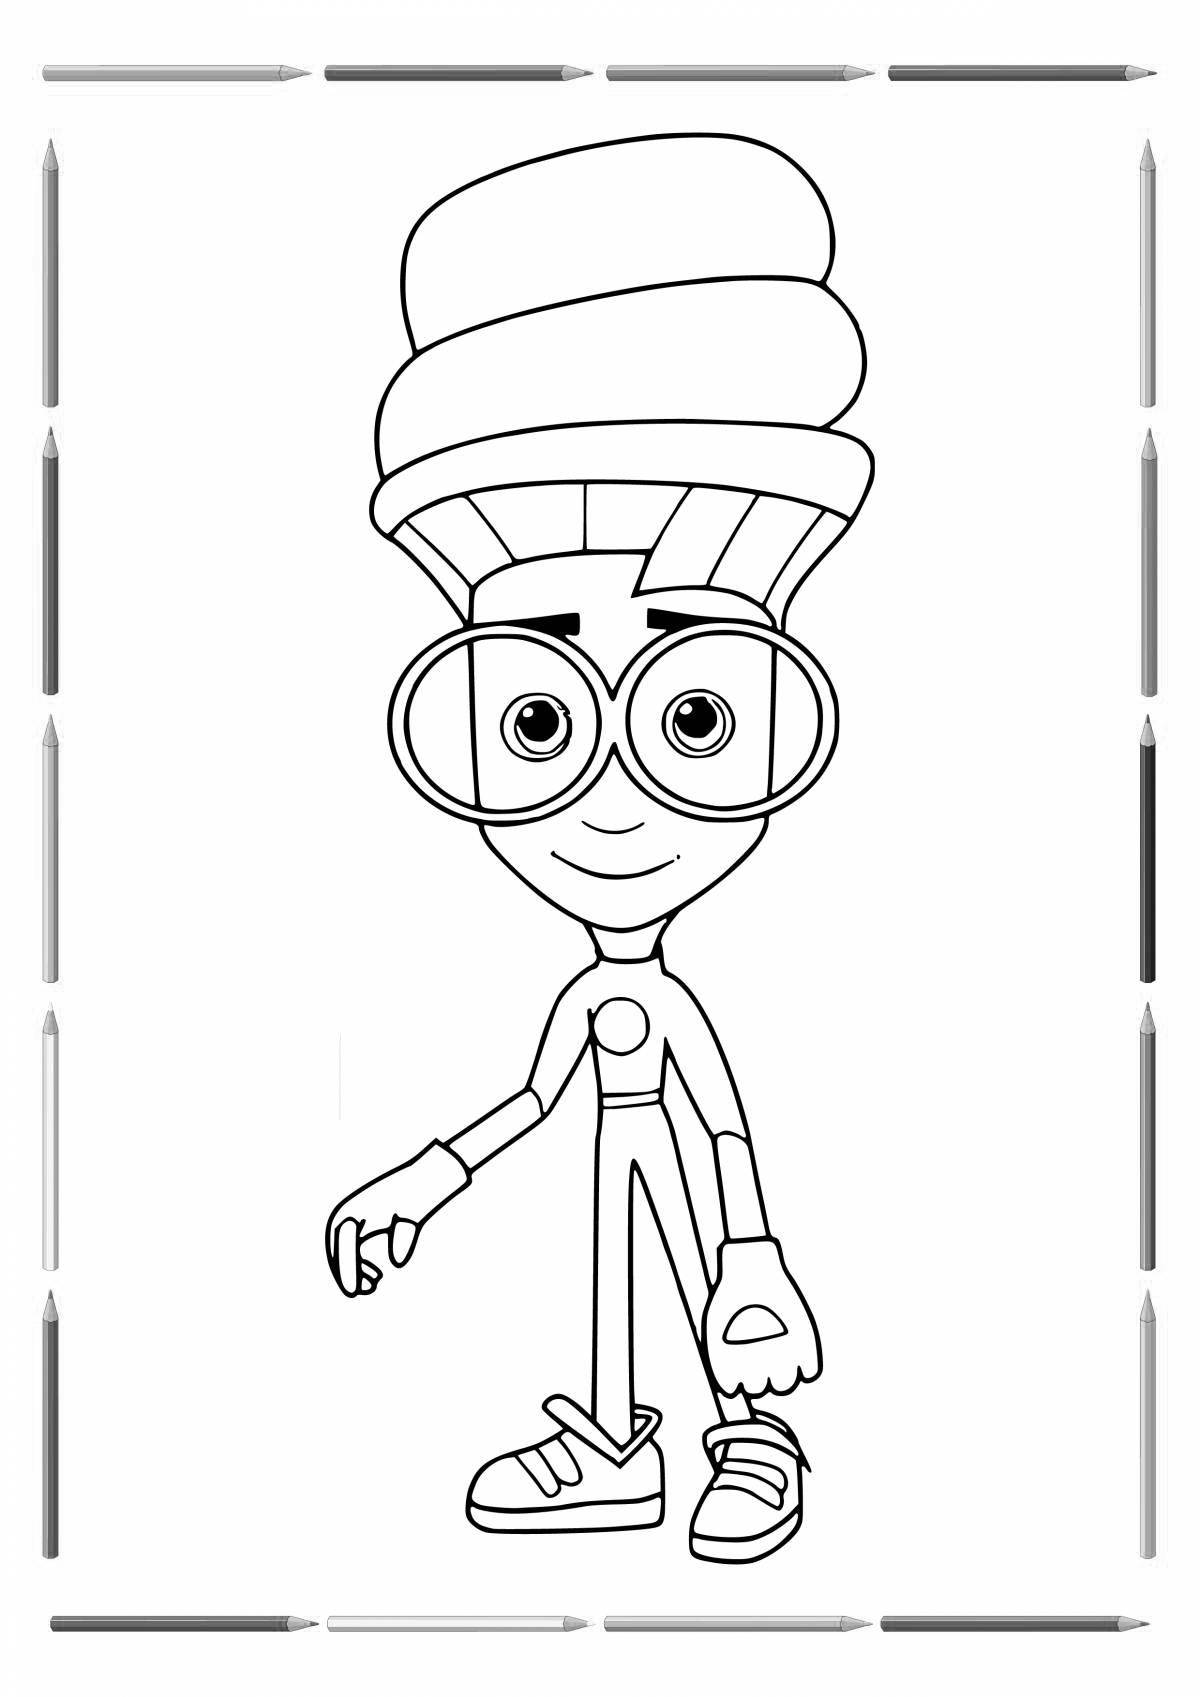 Amazing fixies coloring pages for kids